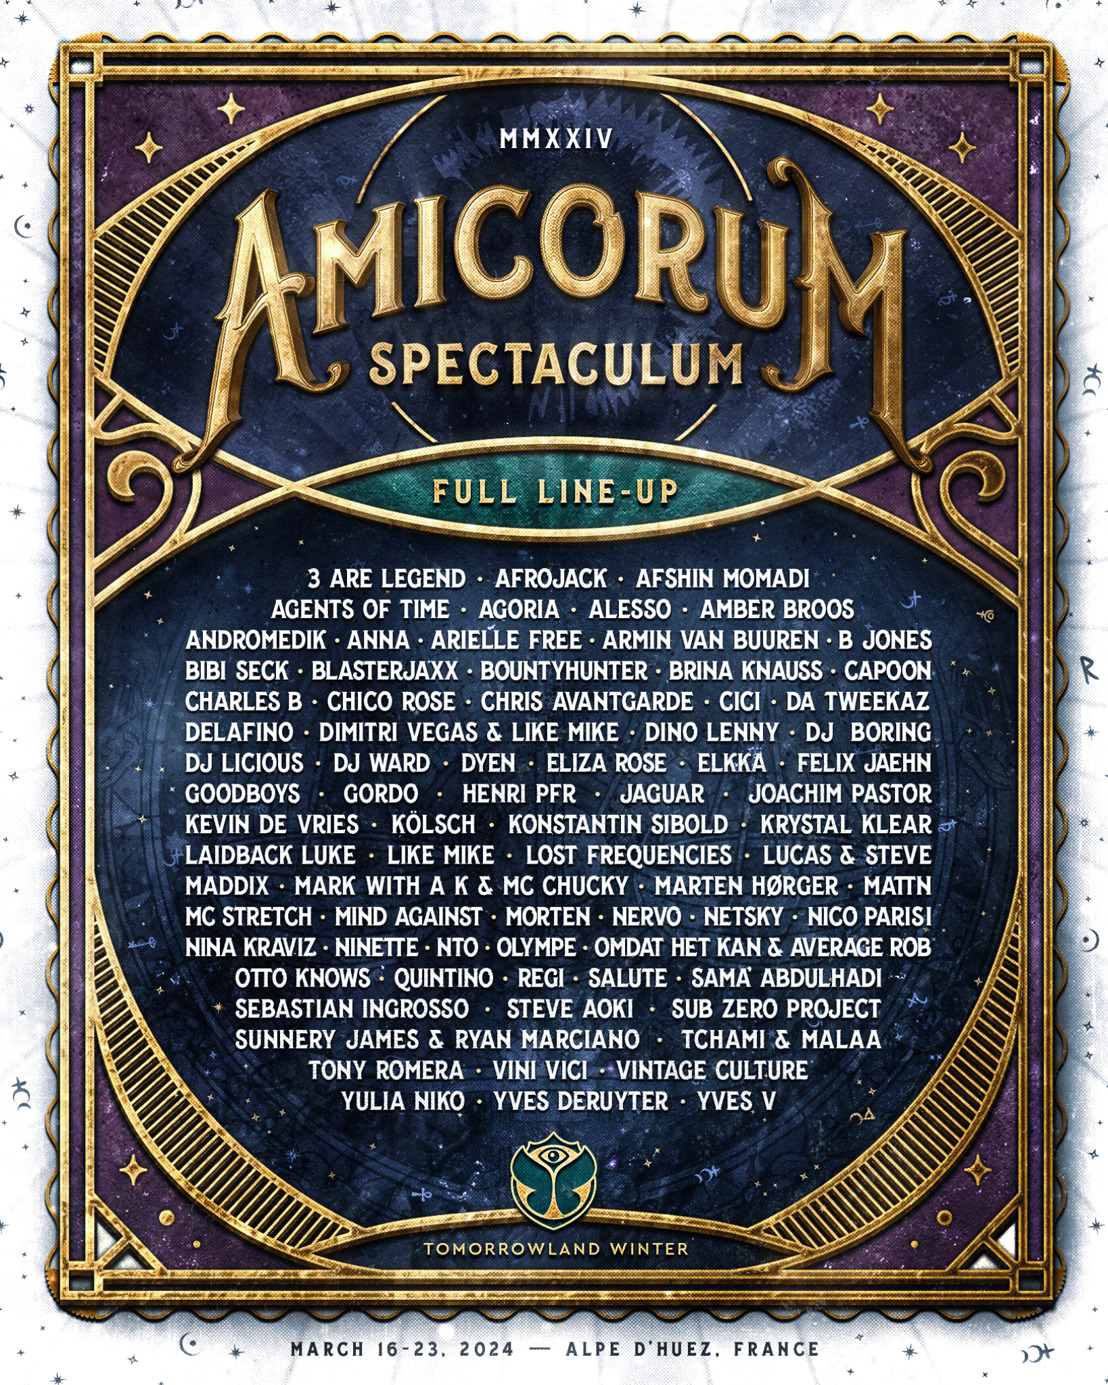 Tomorrowland Winter unveils the full 2024 line-up